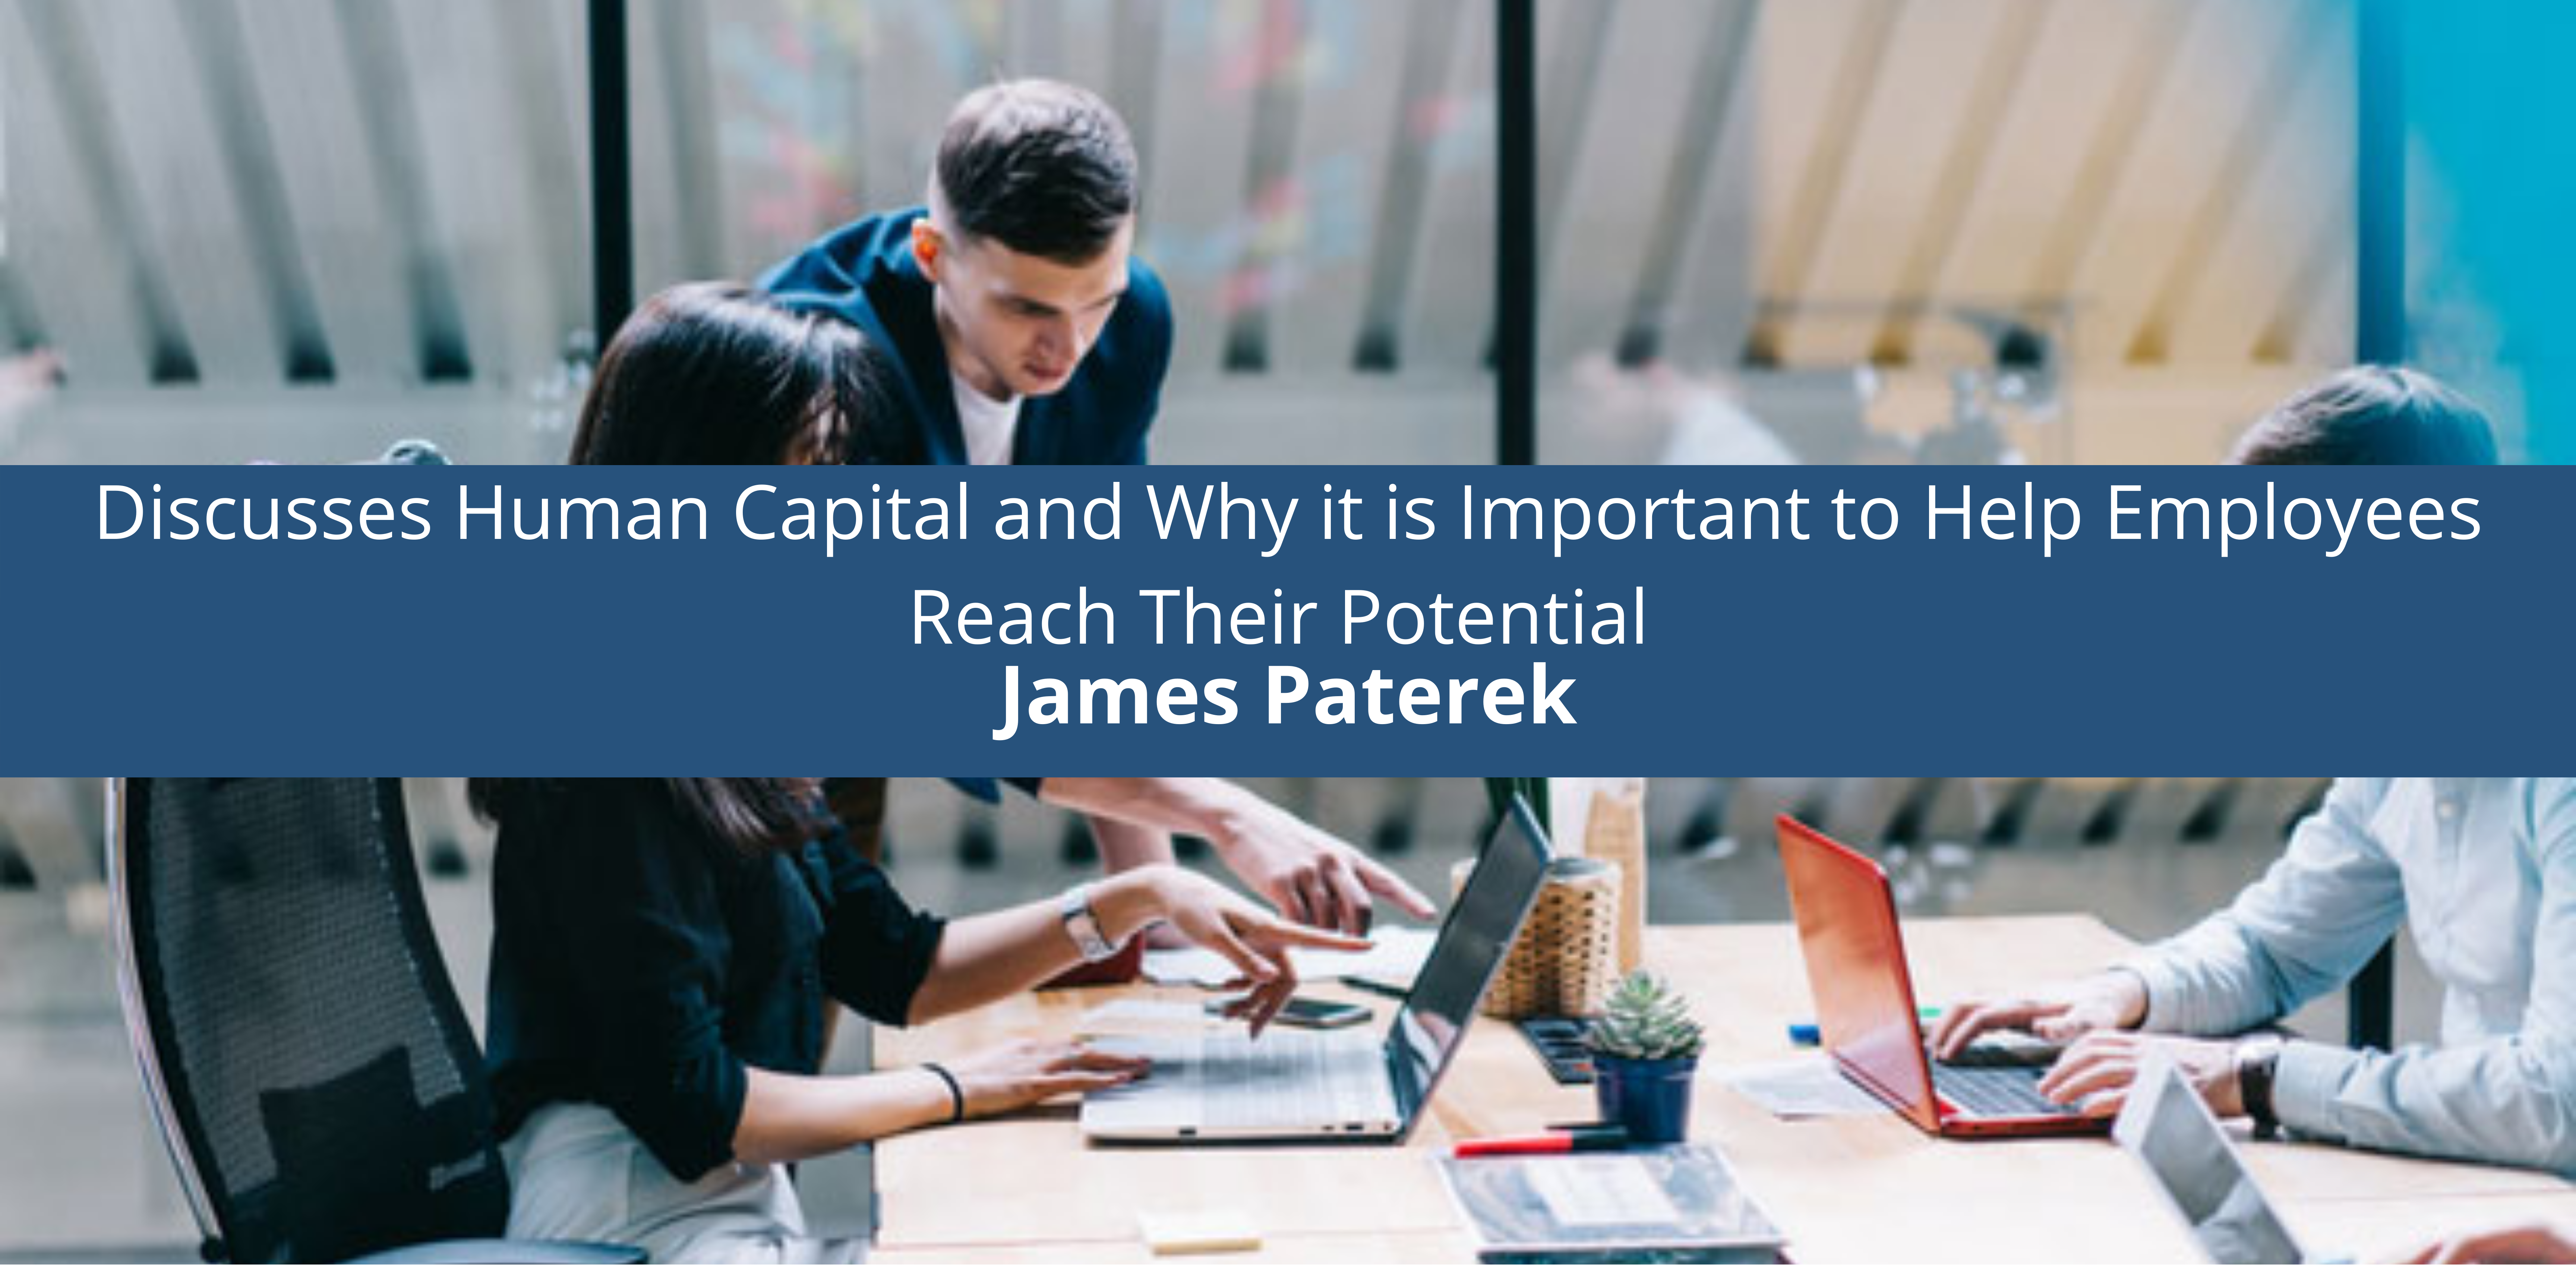 James Paterek Discusses Human Capital and Why it is Important to Help Employees Reach Their Potential-Navigating the First Interview: Securing the Ideal Locums Physician for Your Hospital